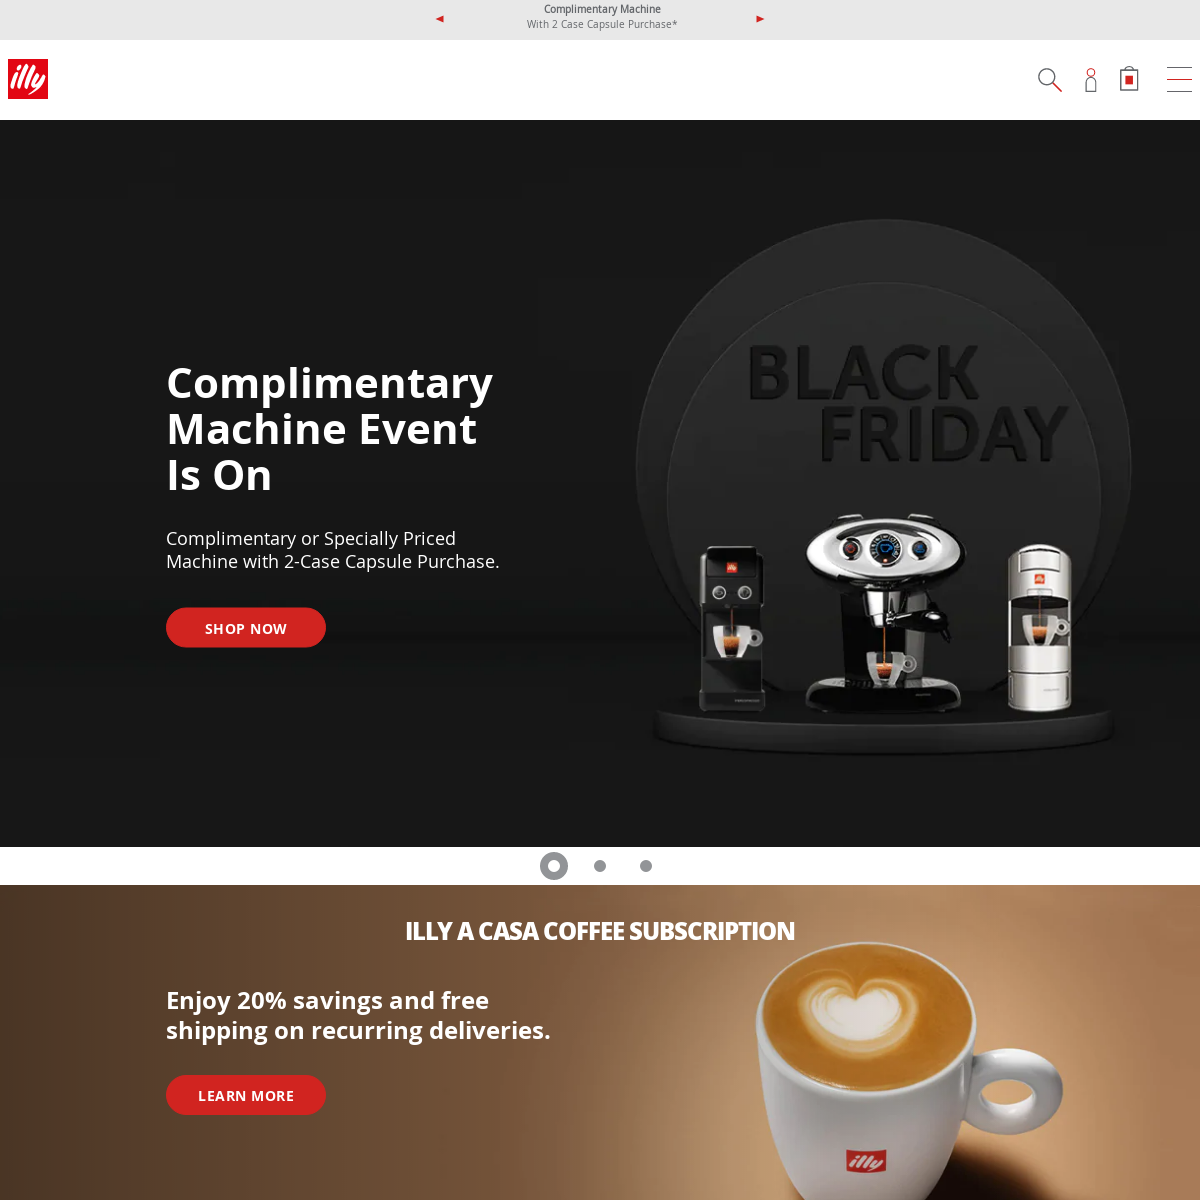 A complete backup of illy.com